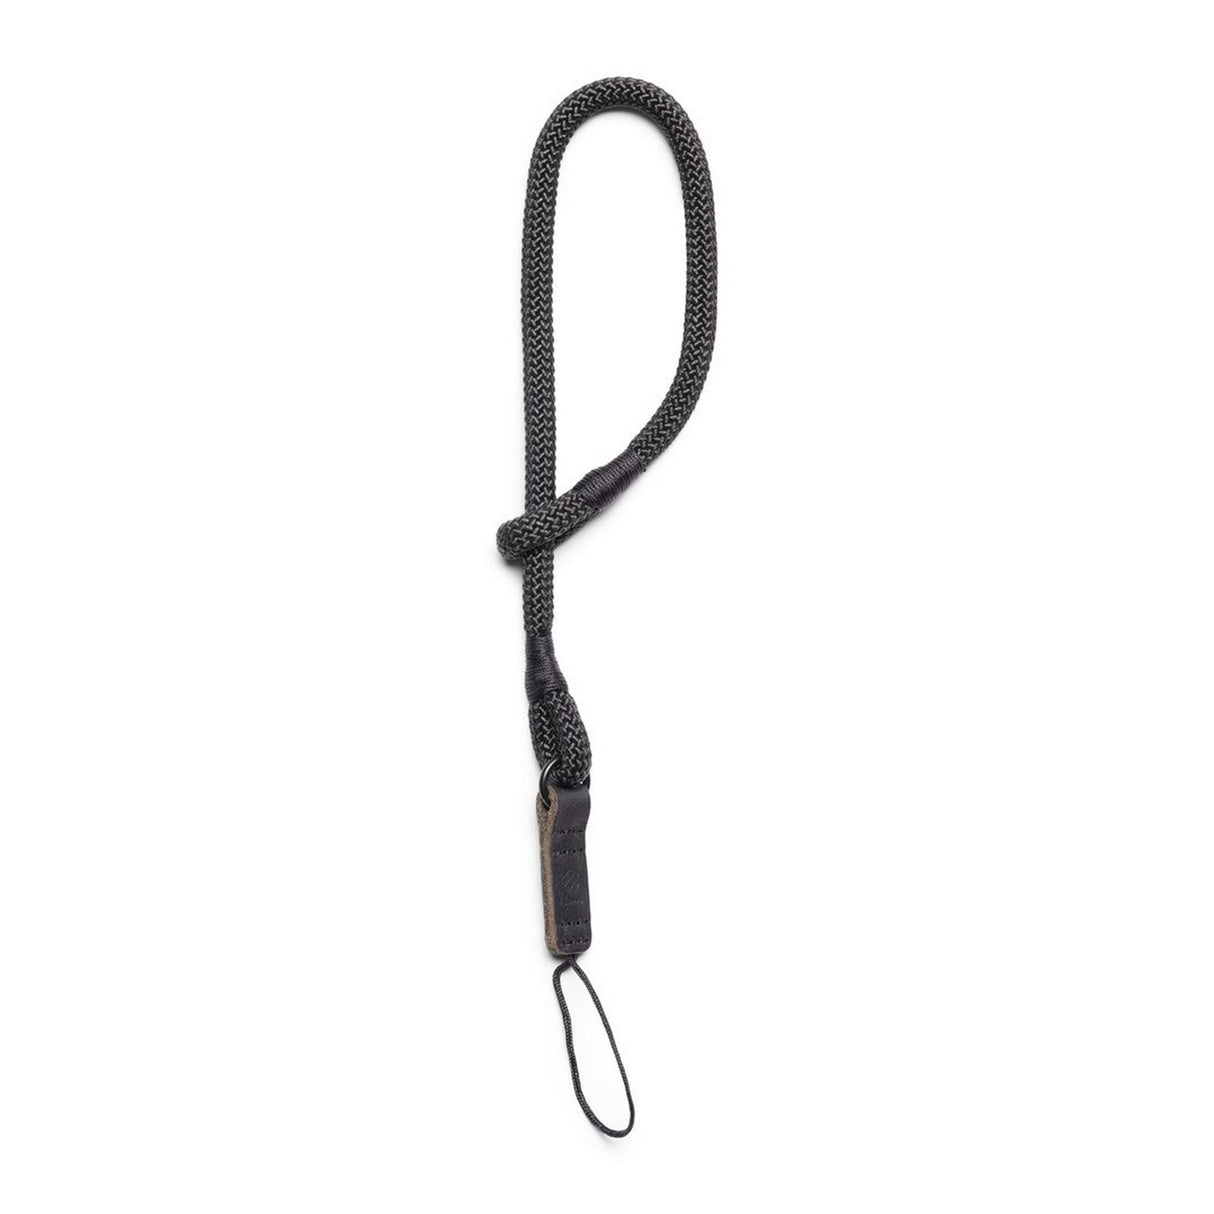 Langly Camera and Phone Wrist Strap, Black